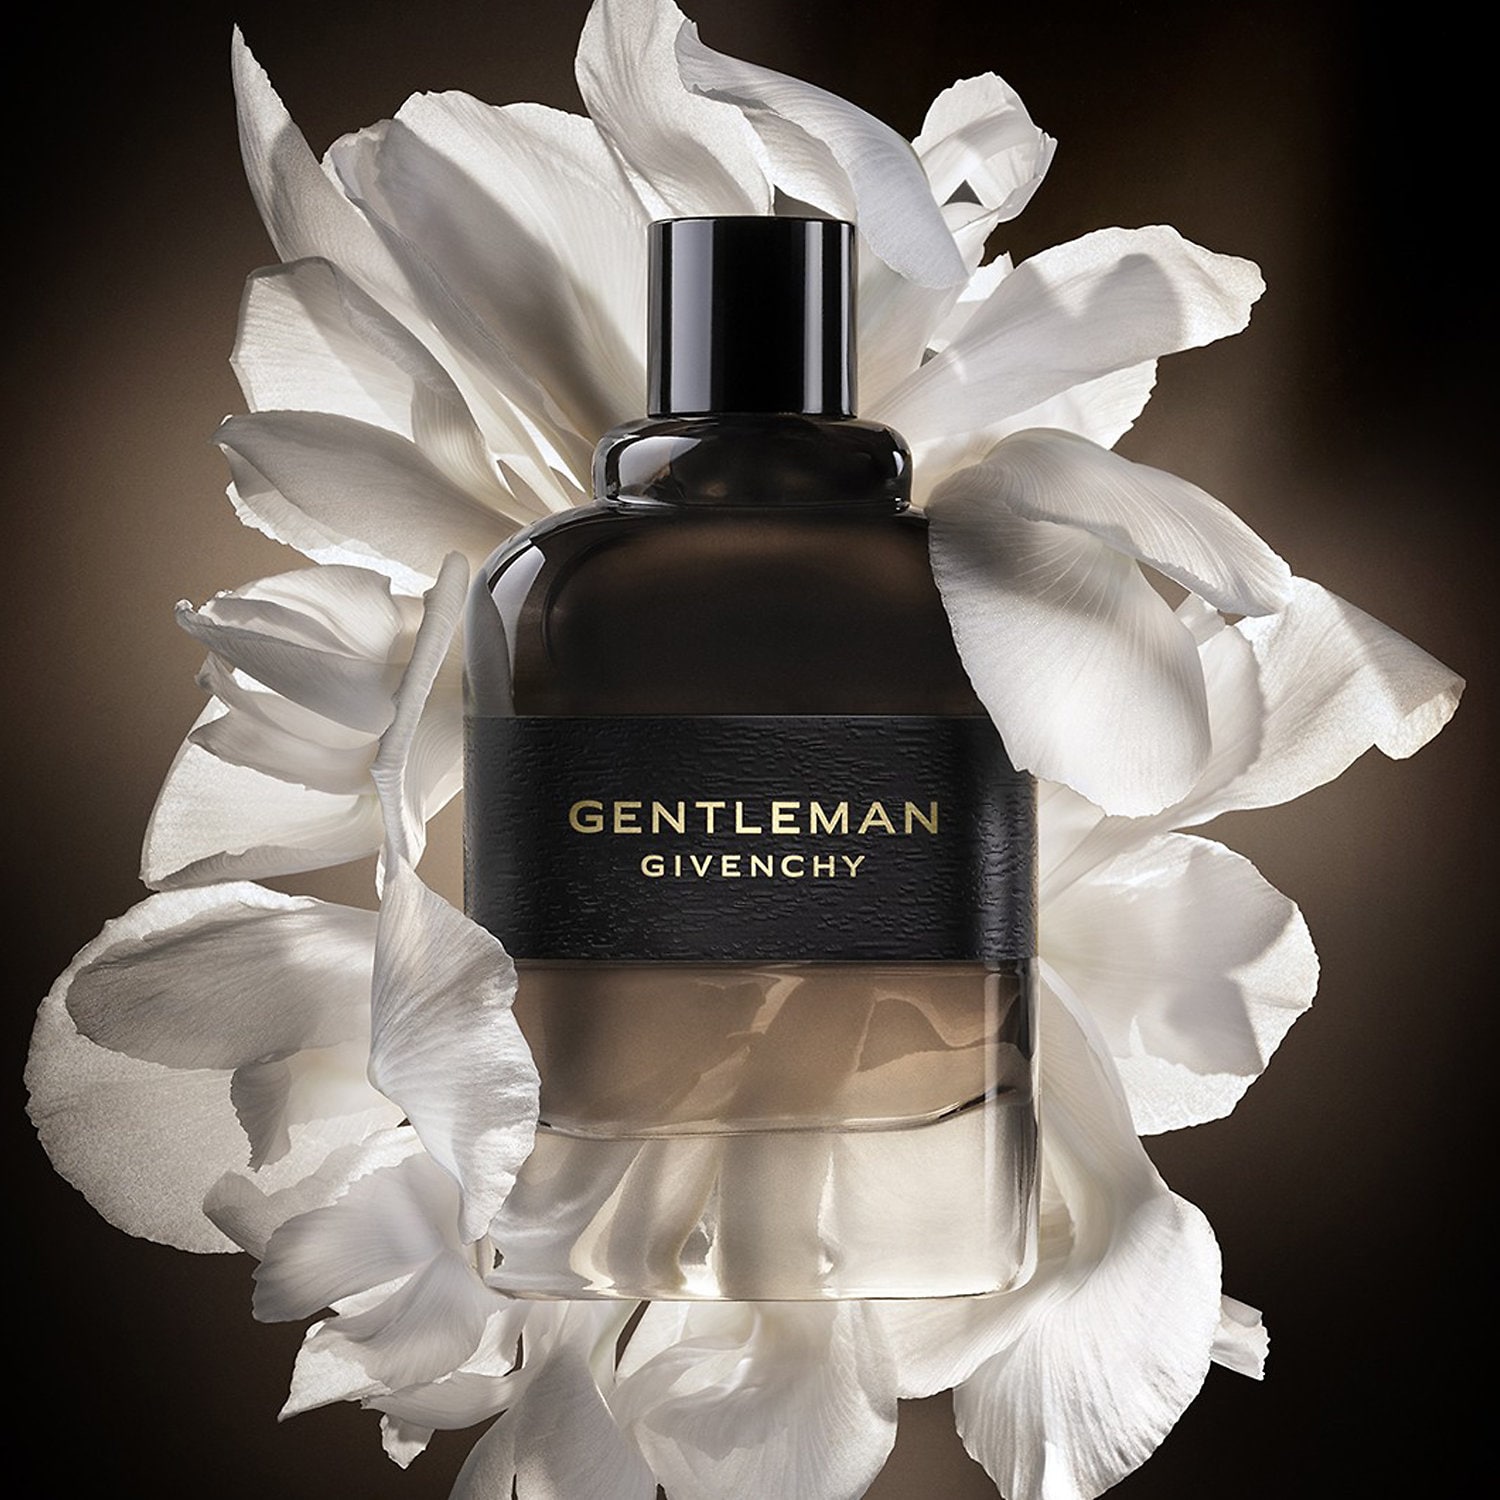 nuoc hoa nam givenchy gentleman boisee orchard.vn 2